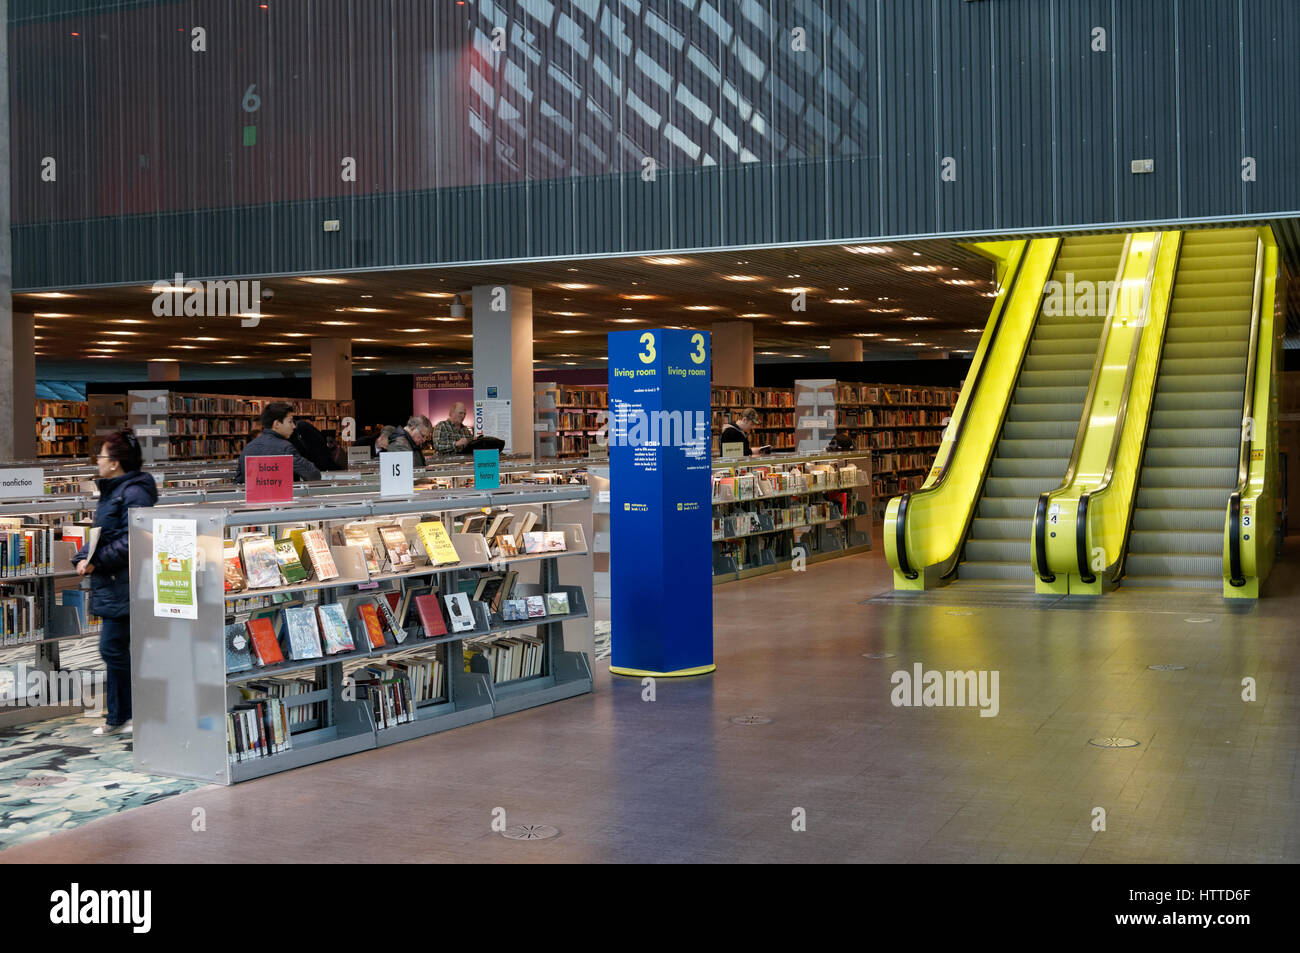 Book shelves and escalators in the Living Room on Level 3  of Seattle Central Library building in downtown Seattle, Washington state, USA Stock Photo